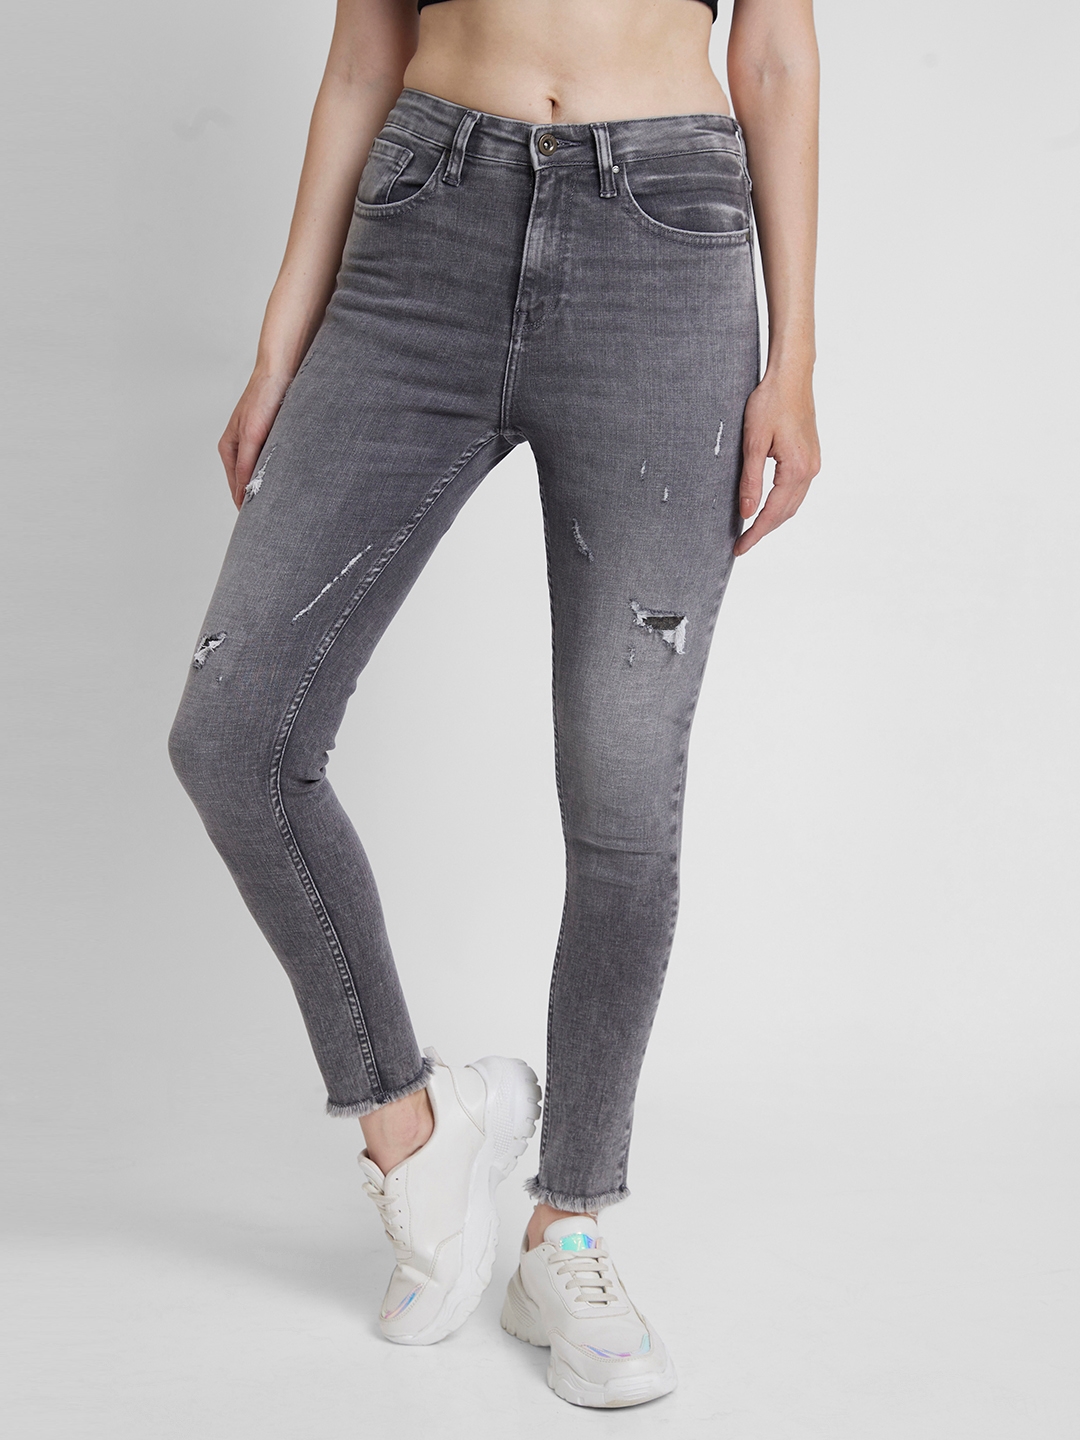 Just Love Ripped Denim Jeggings for Women Jeans India  Ubuy